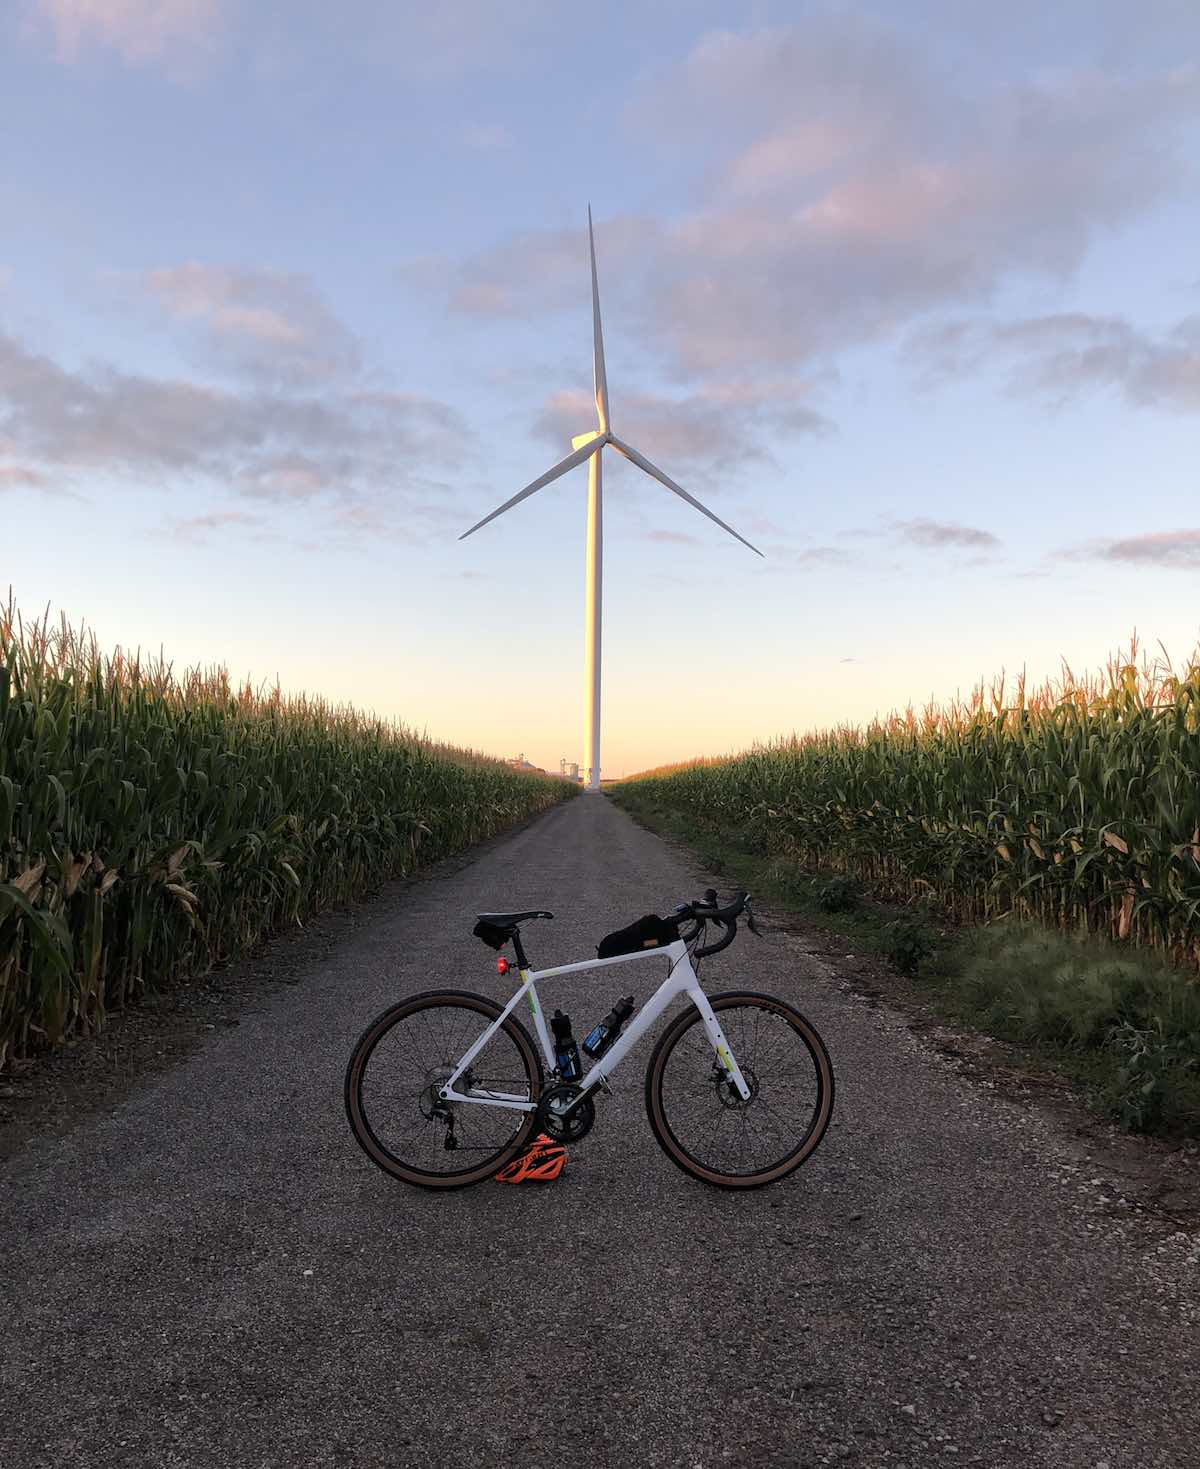 bikerumor pic of the day bicycle in the middle of a gravel road with corn growing on both sides leading to a modern windmill at dusk